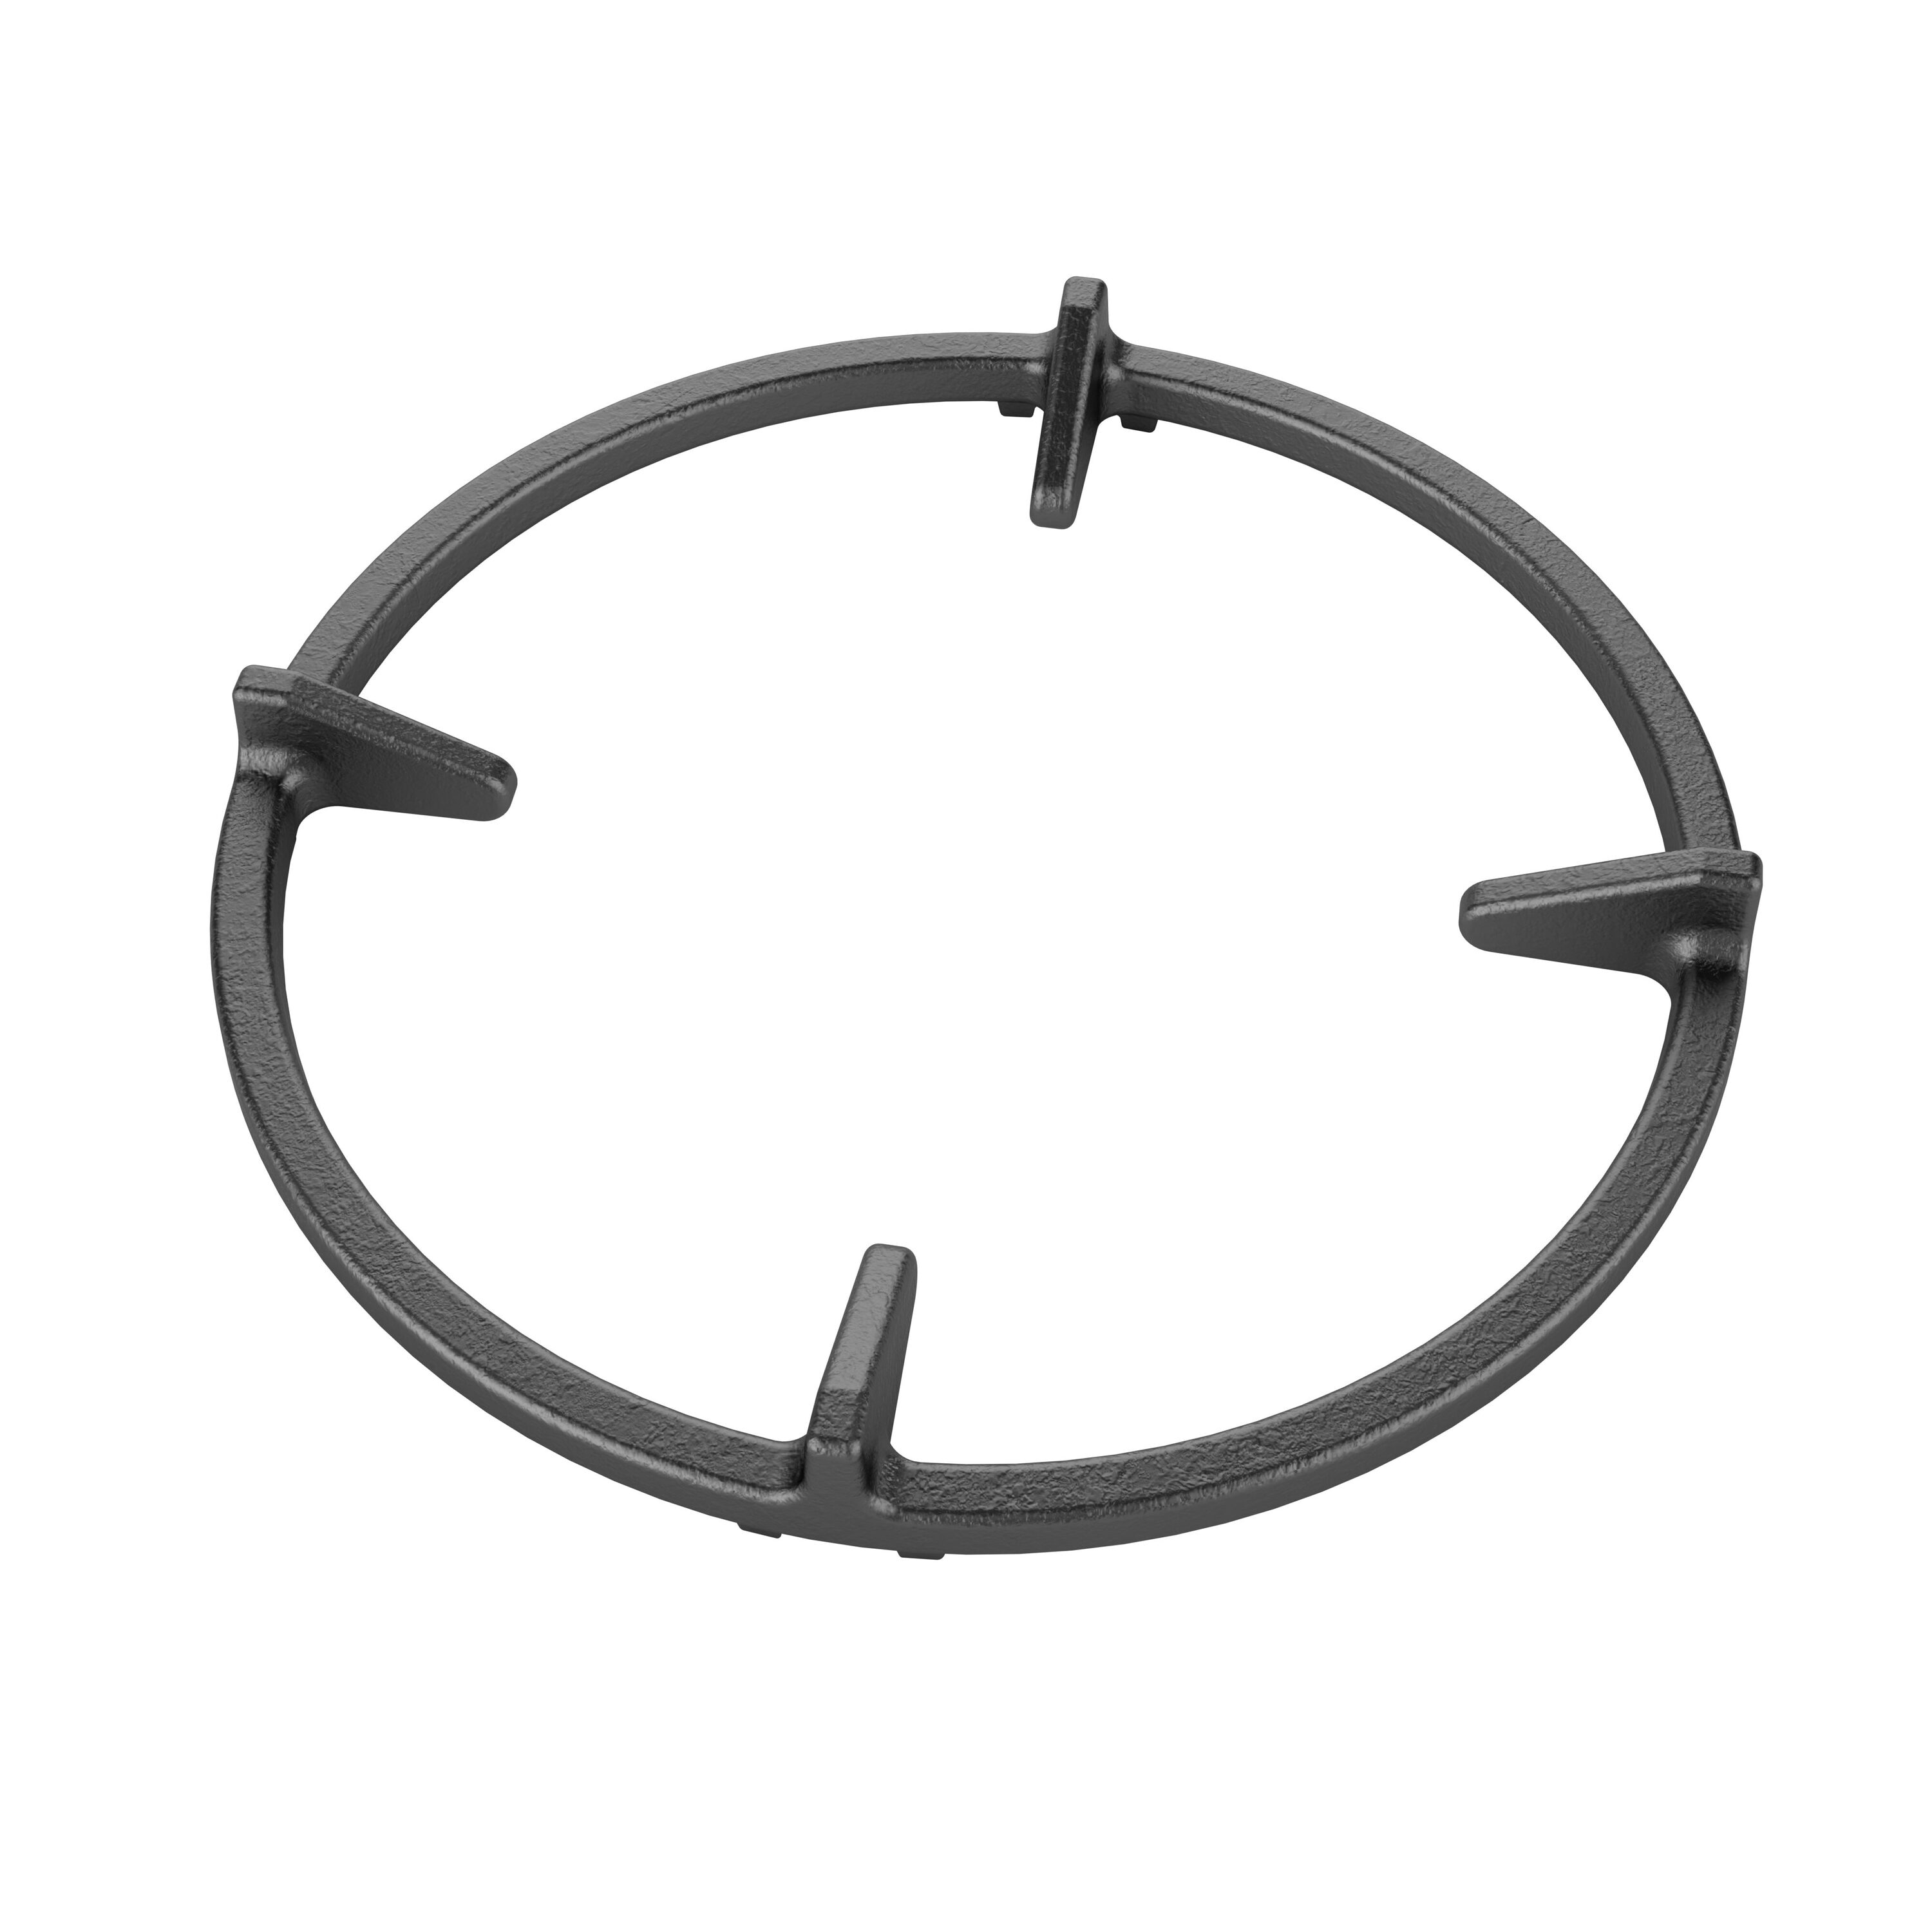 Generic iSH09-M415836mn Wok Ring Gas Stove, 9 Inch Support Ring for Gas  Stove Cast Iron Non Slip Stove Top Wok Stand Gas Range Parts for GE,  KitchenAid